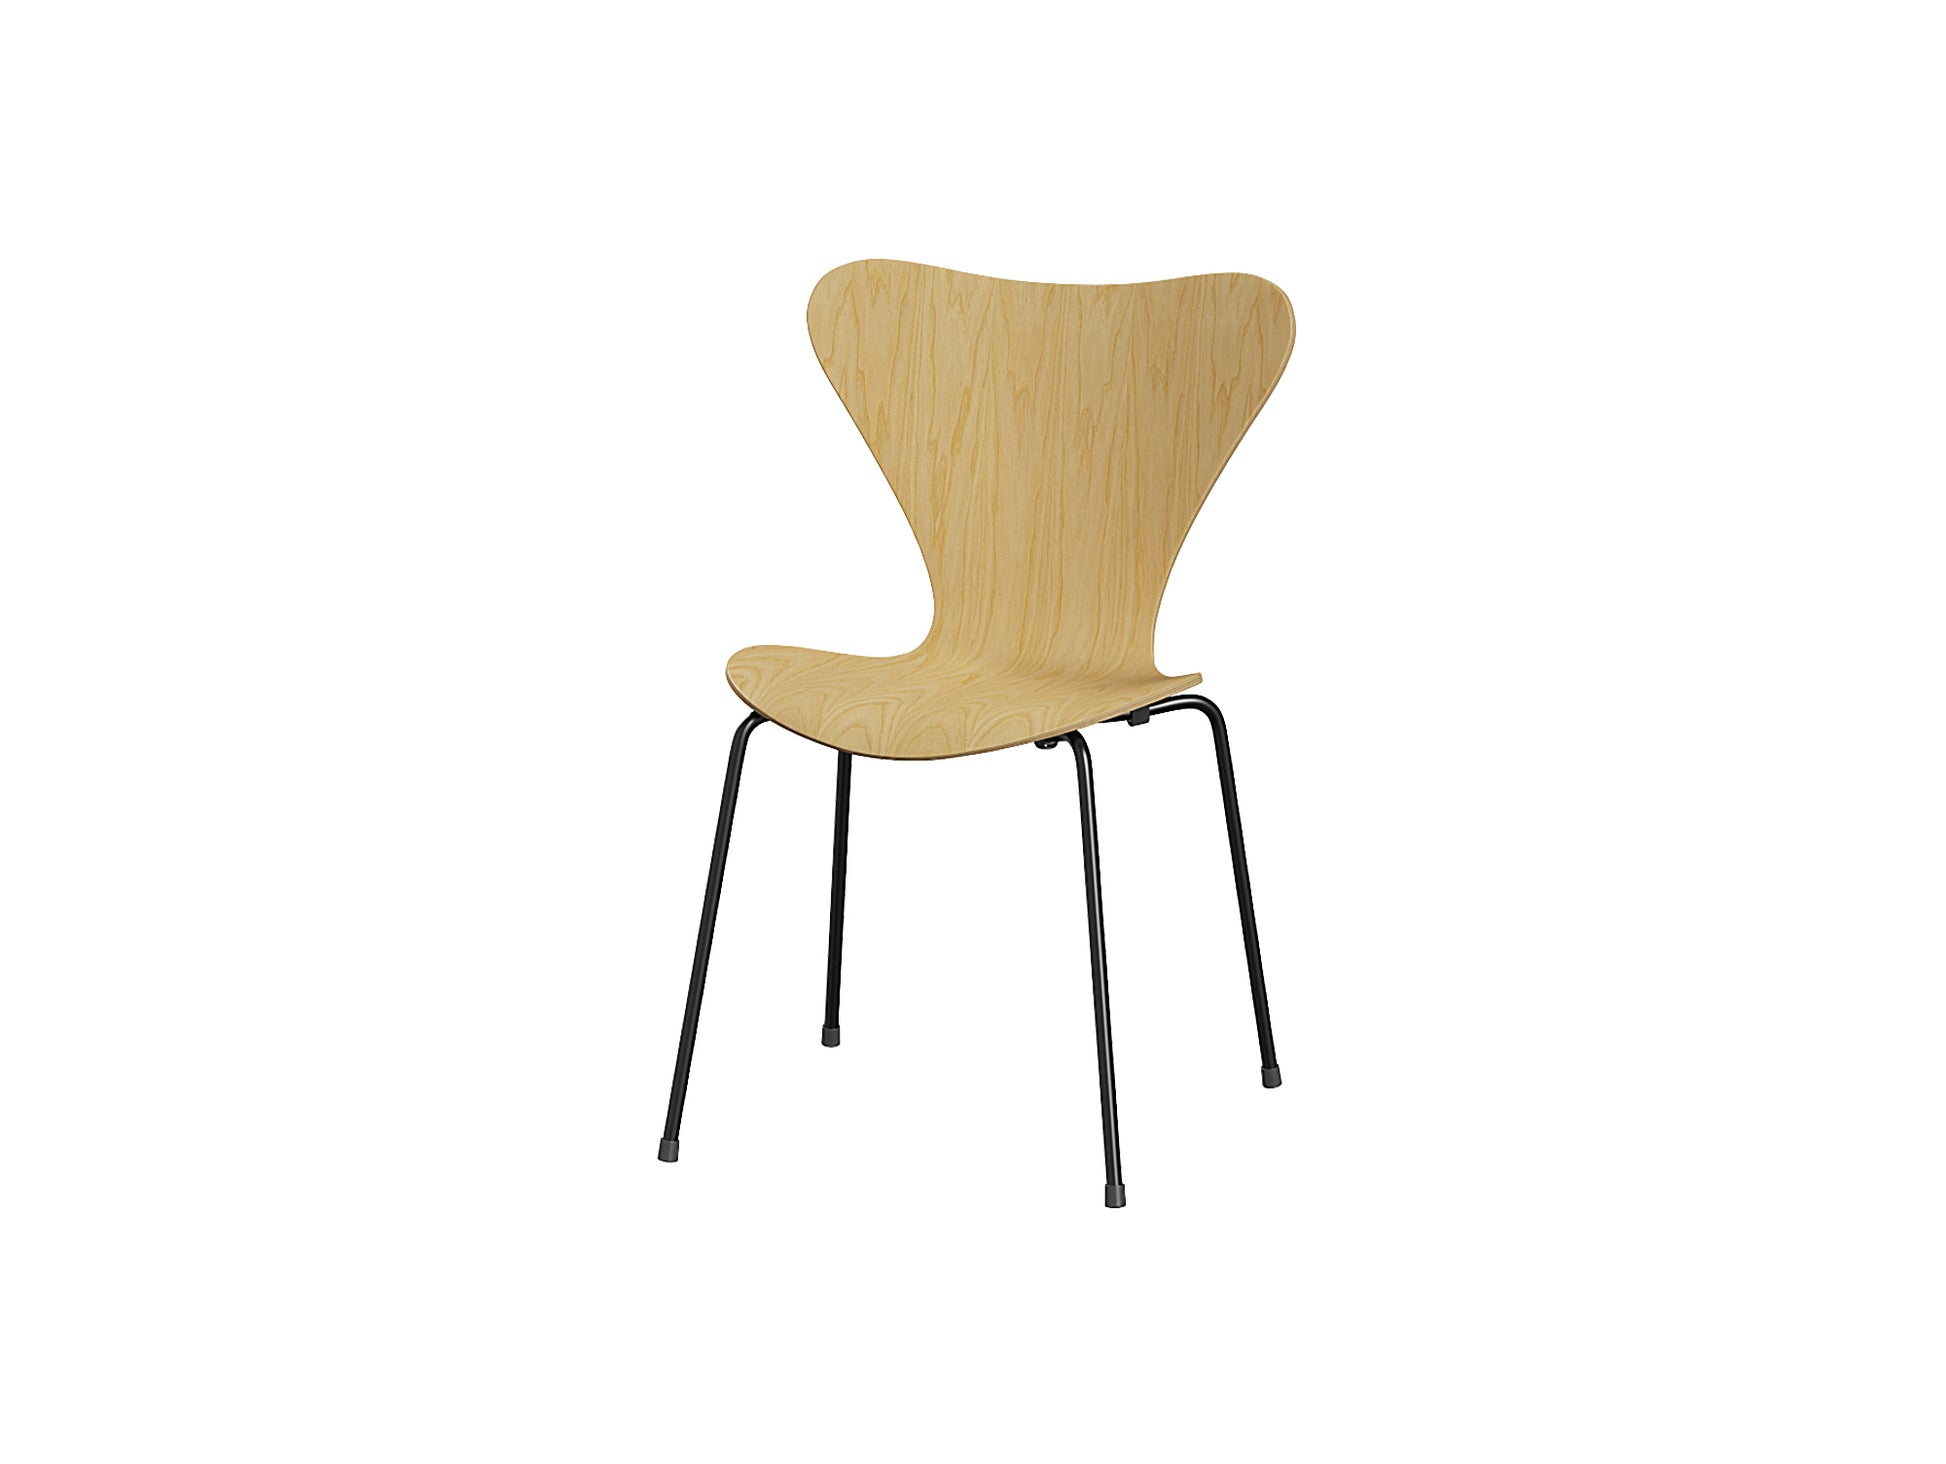 Series 7 Dining Chair (Clear Lacquered Wood) by Fritz Hanse - Ash / Black Steel